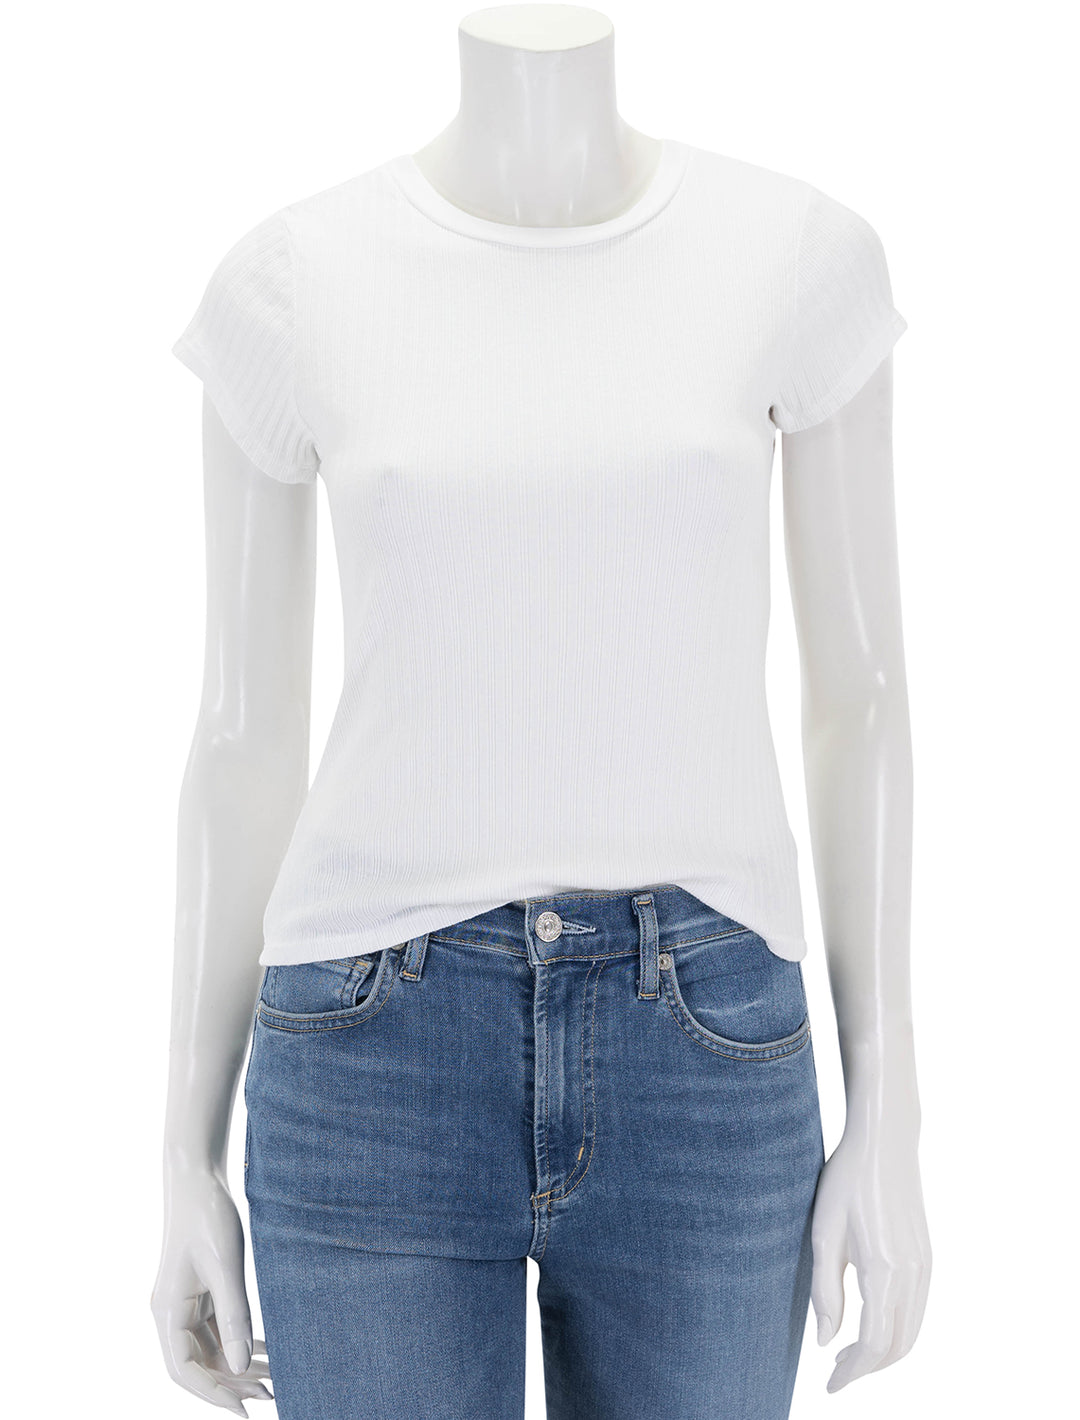 Front view of Perfectwhitetee's etta ribbed tee in white.